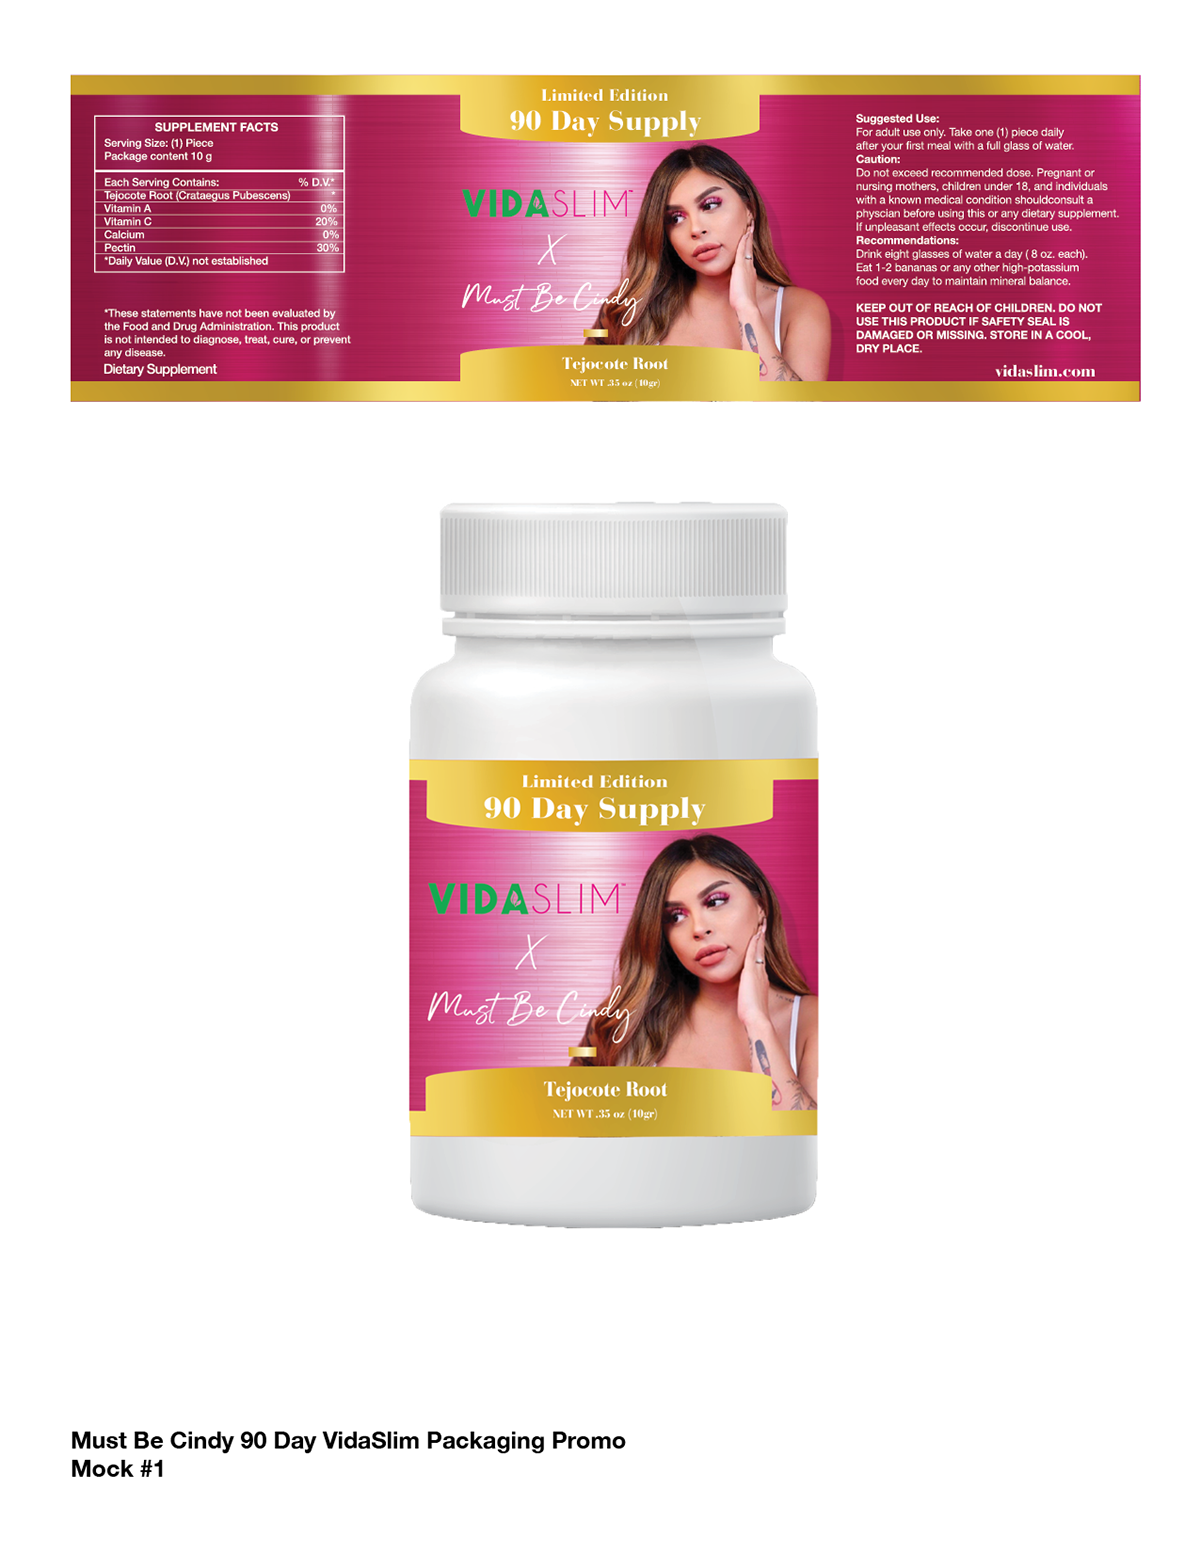 diet fitness influencers package design  supplements